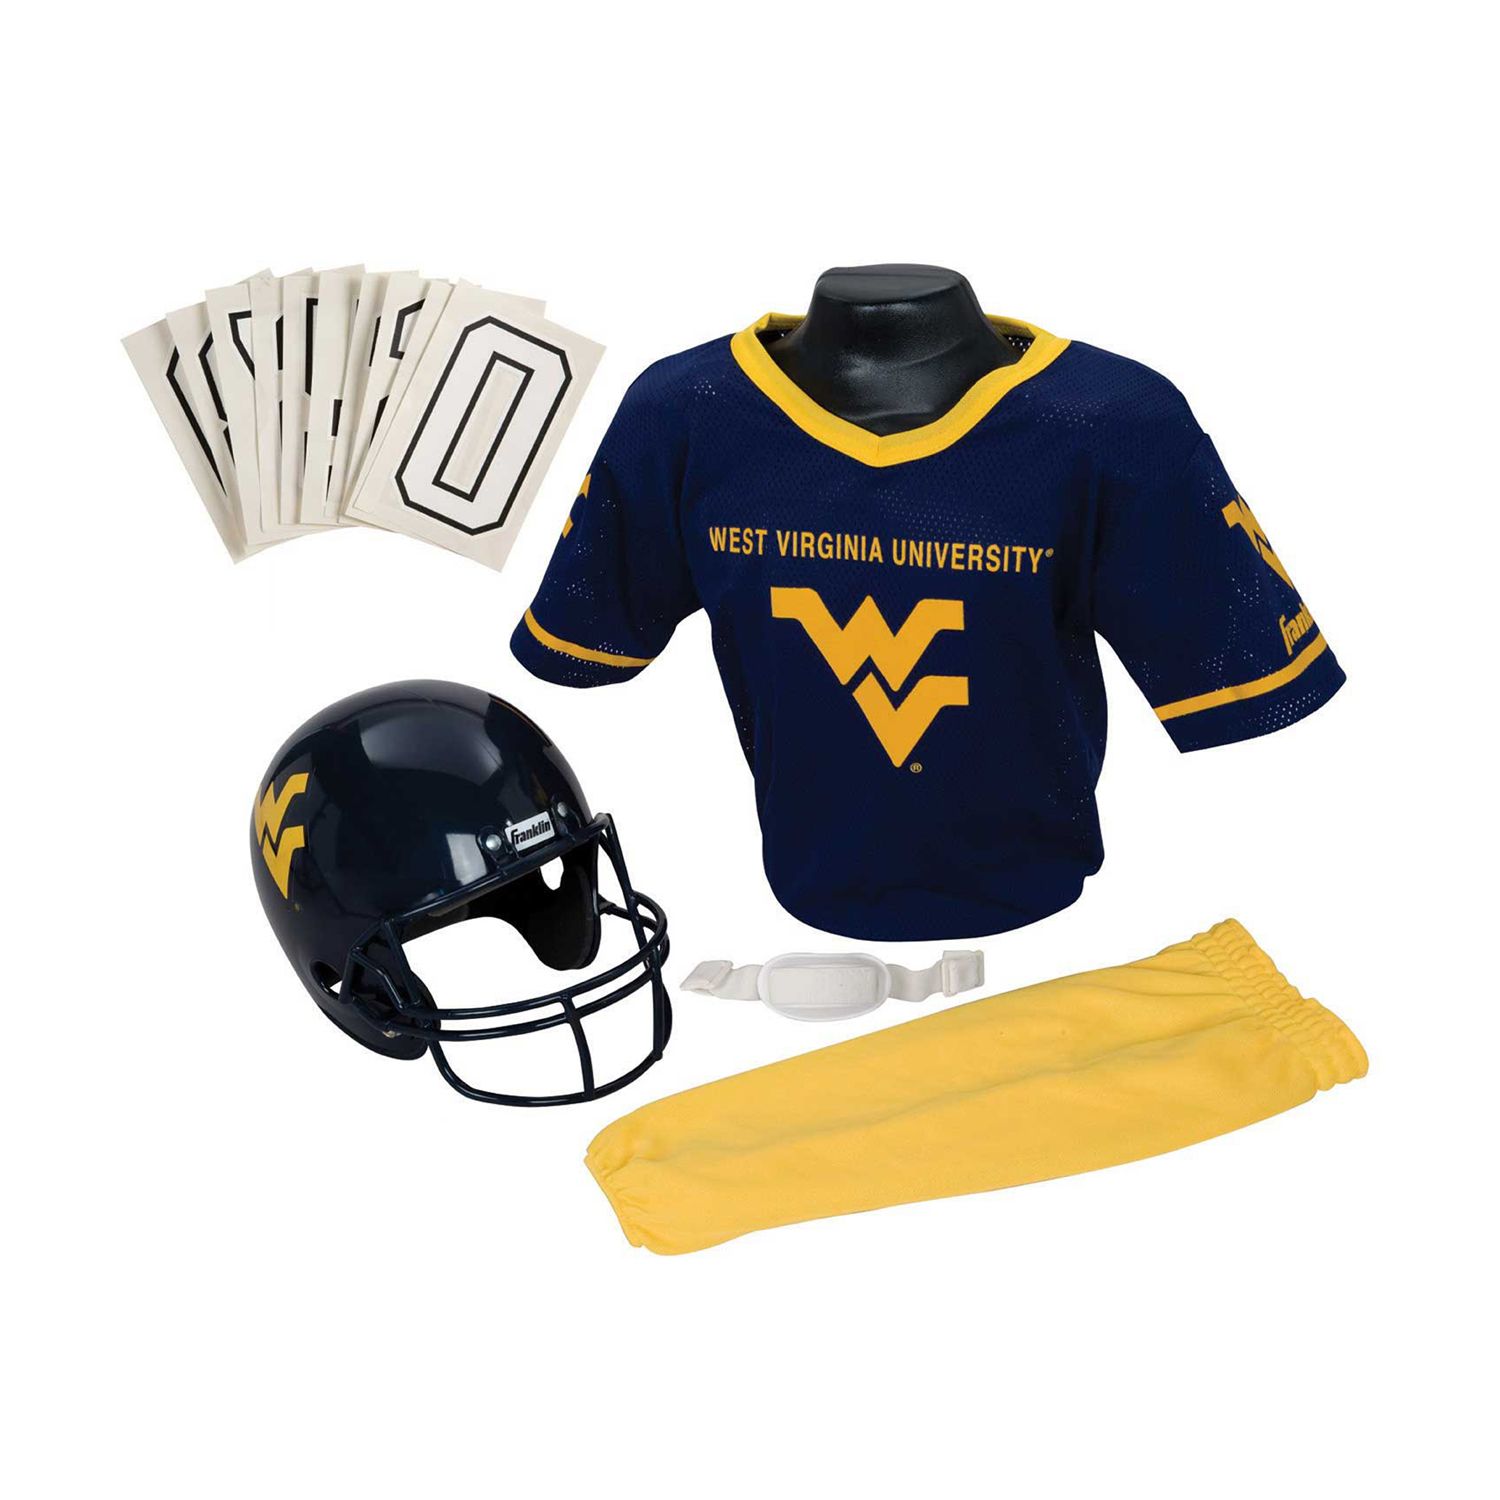 Men's Nike Navy West Virginia Mountaineers #22 Home Game Jersey, L